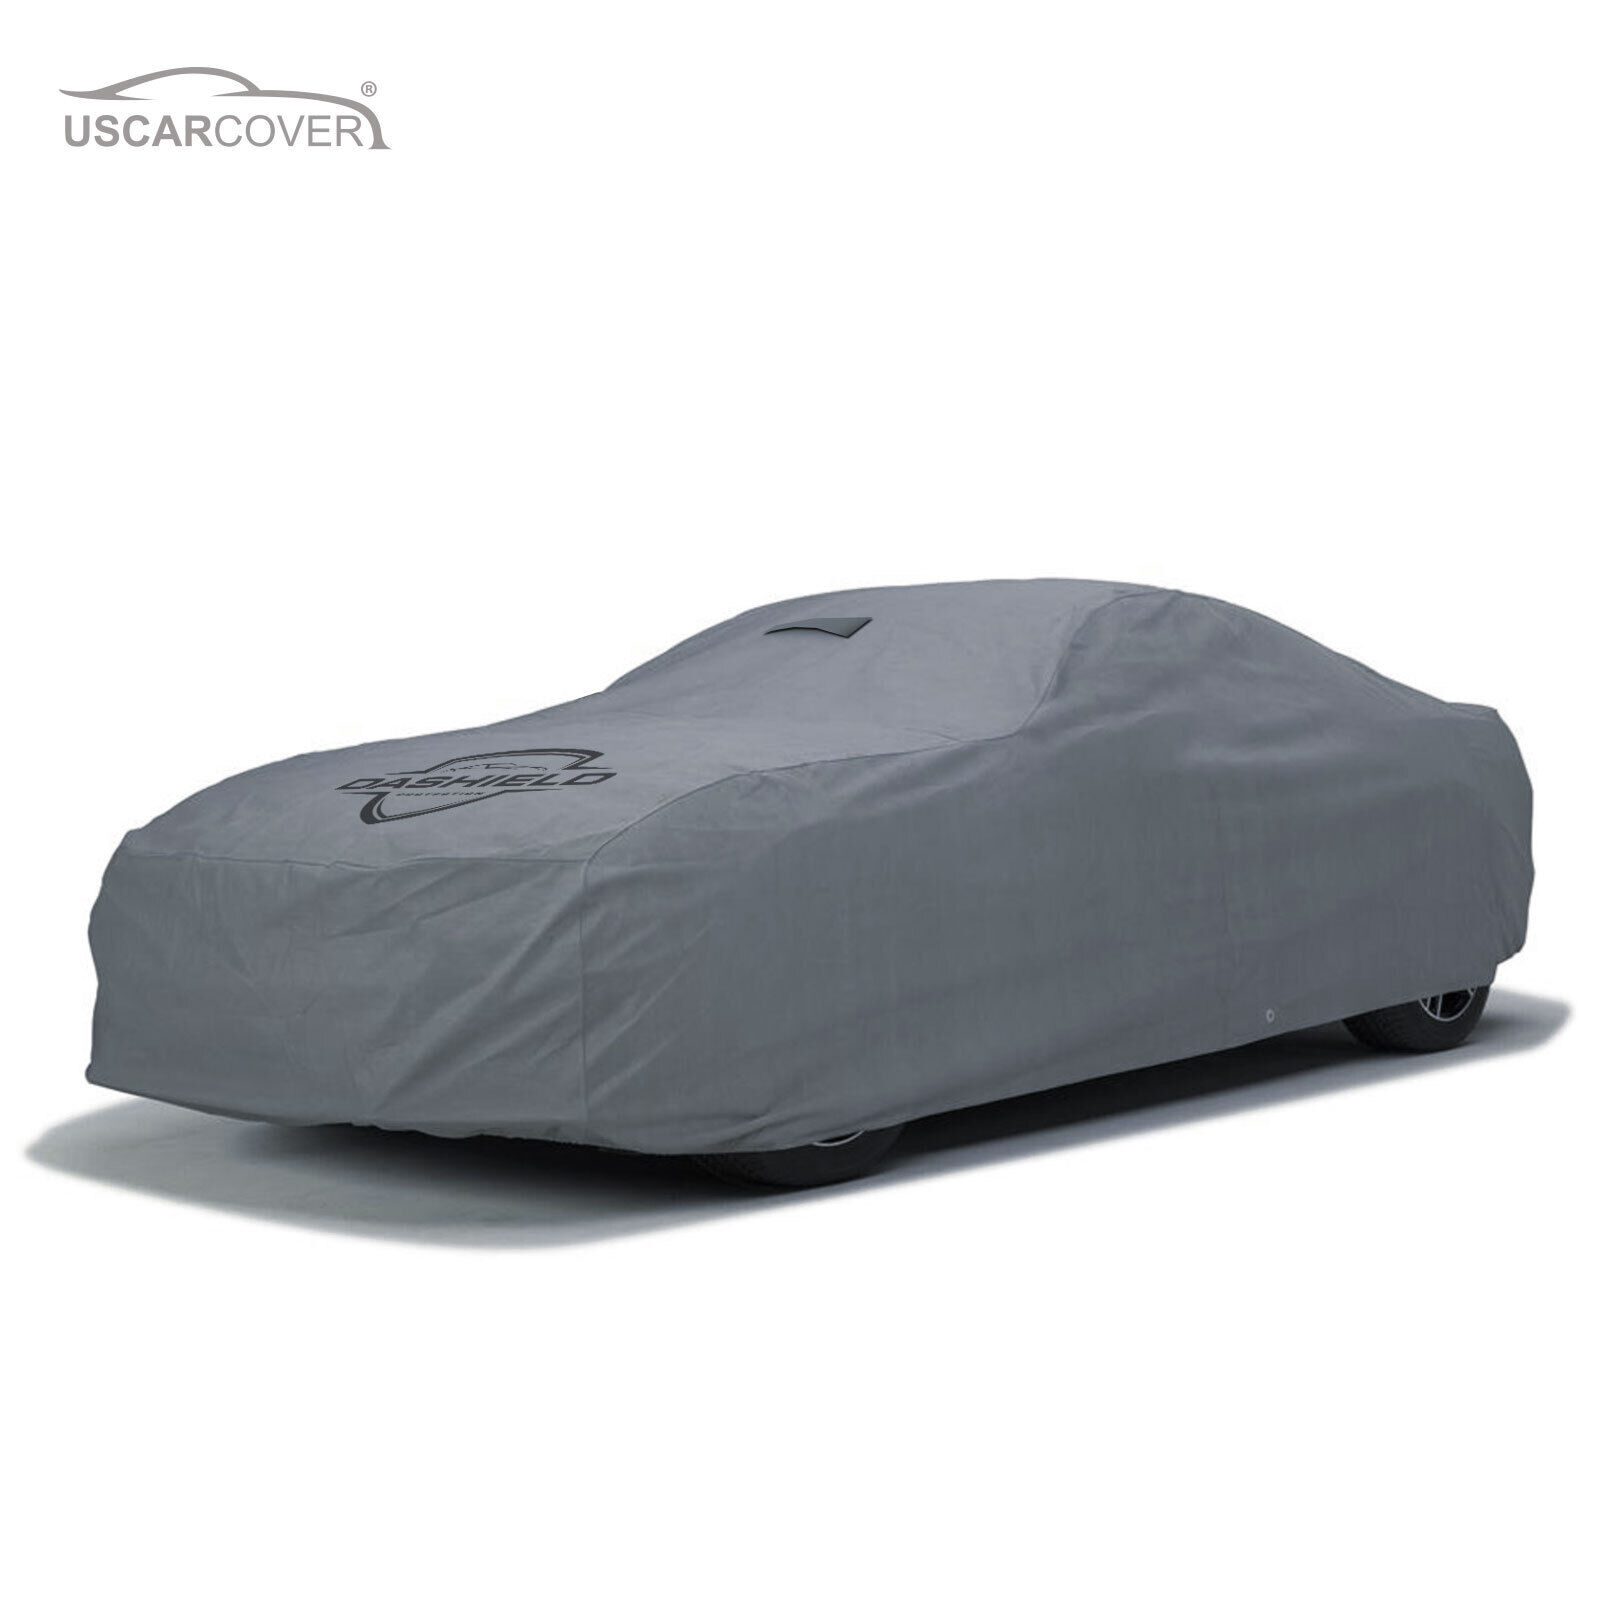 DaShield Ultimum Series Waterproof Car Cover for Saleen S7 2002-2006 Coupe